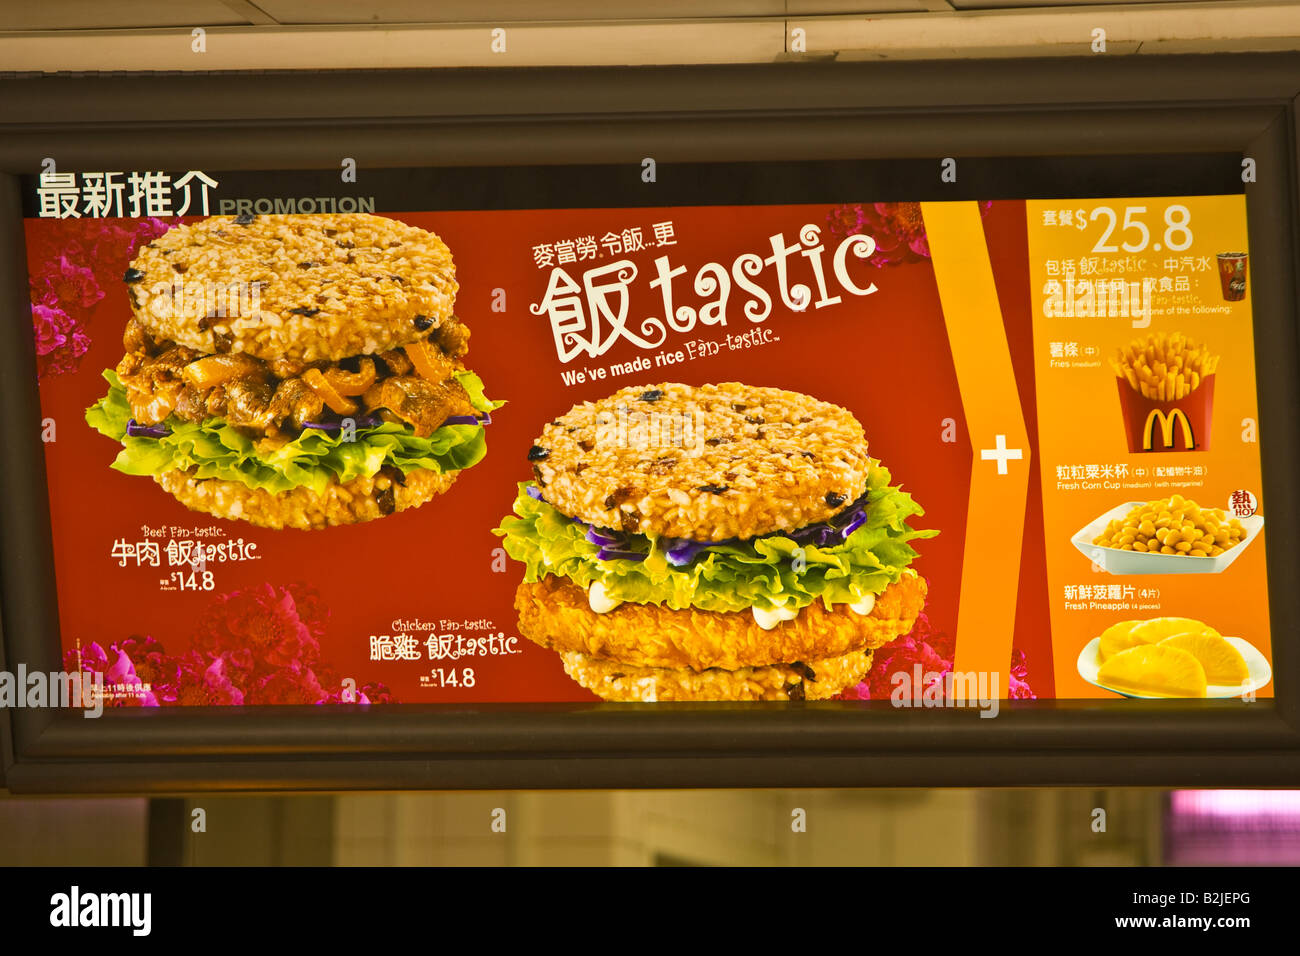 Macao Chine McDonald's fast food restaurant sign Banque D'Images